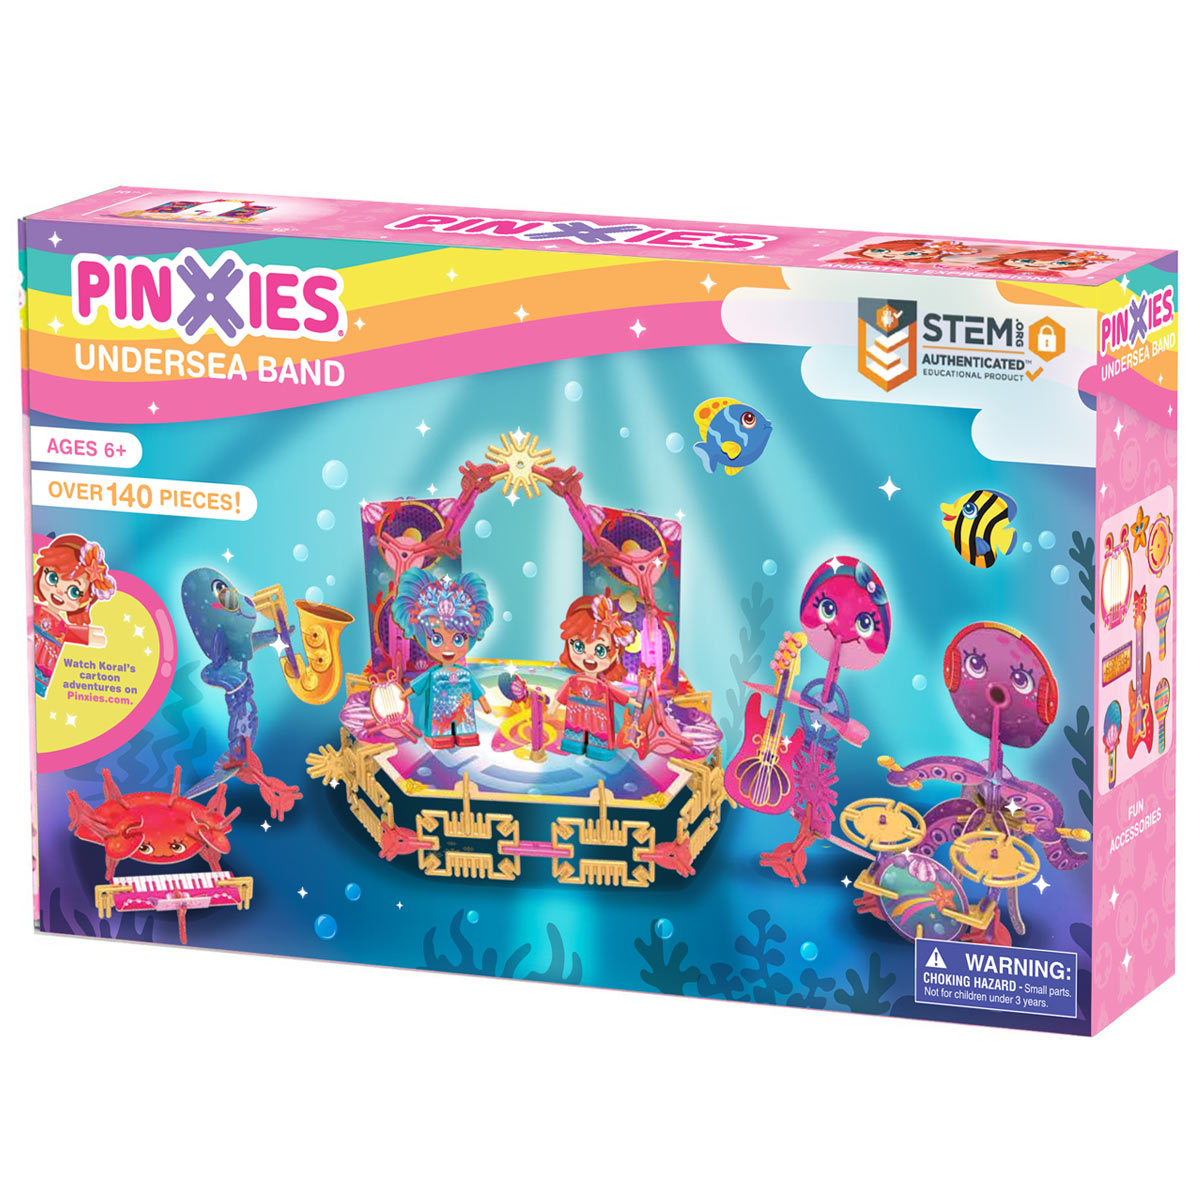 Pinxies Undersea Band STEM authenticated building set for ages 6+